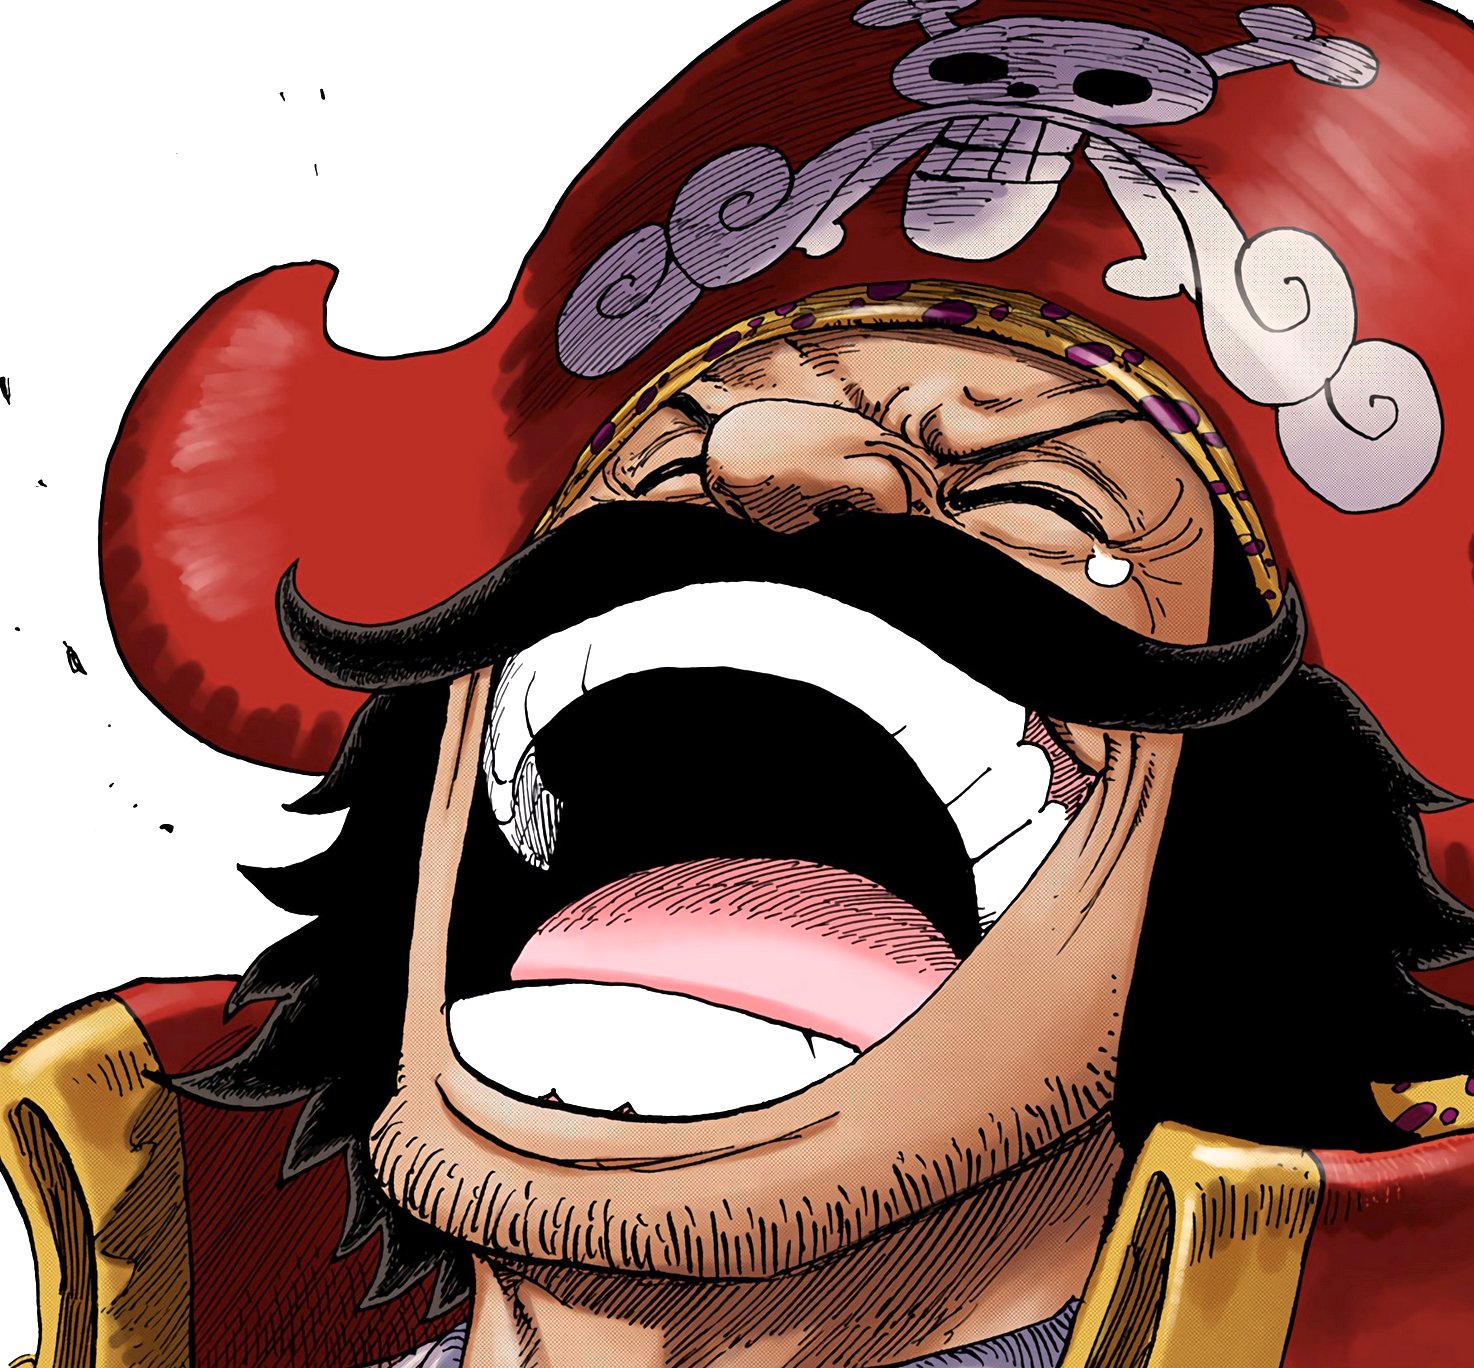 One Piece Story Arcs and Sagas – The Library of Ohara